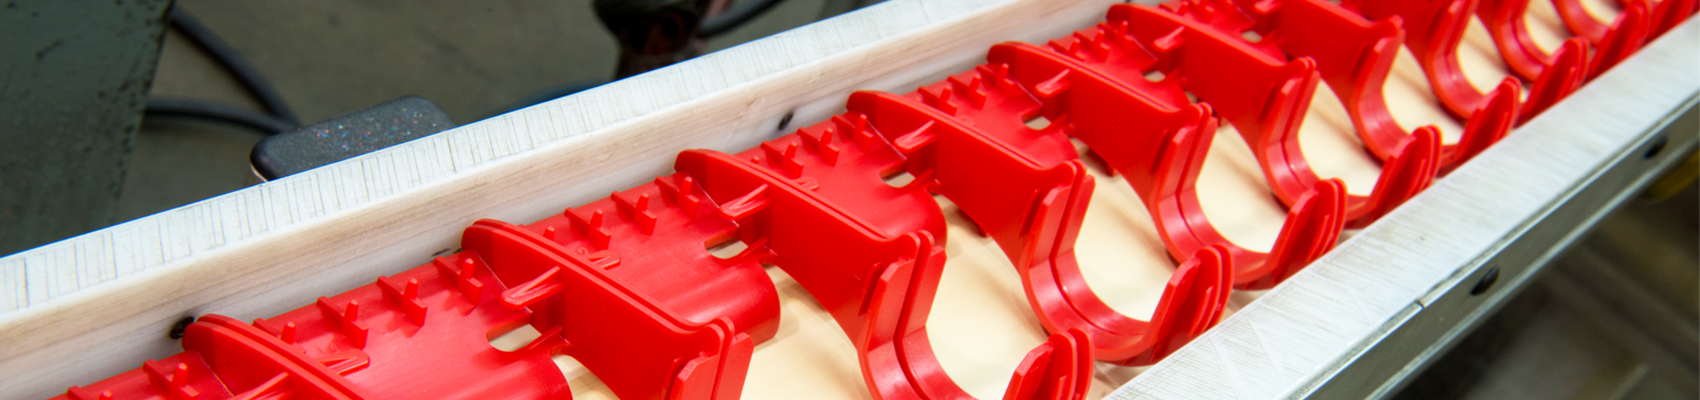 Plastic Injection Mold Production